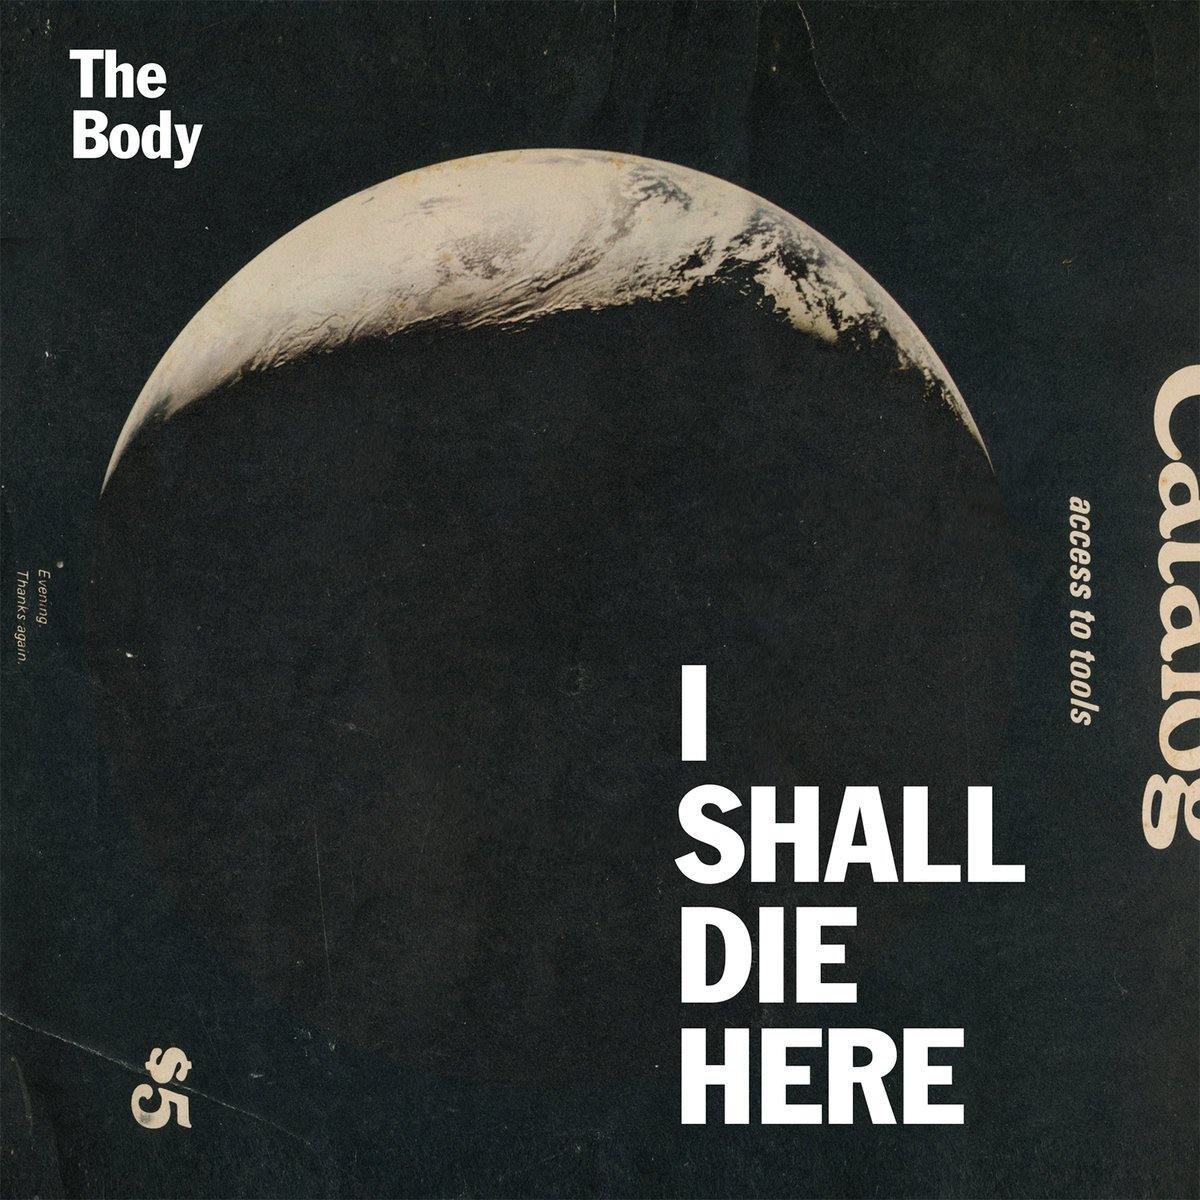 Buy – The Body "I Shall Die Here" 12" – Band & Music Merch – Cold Cuts Merch